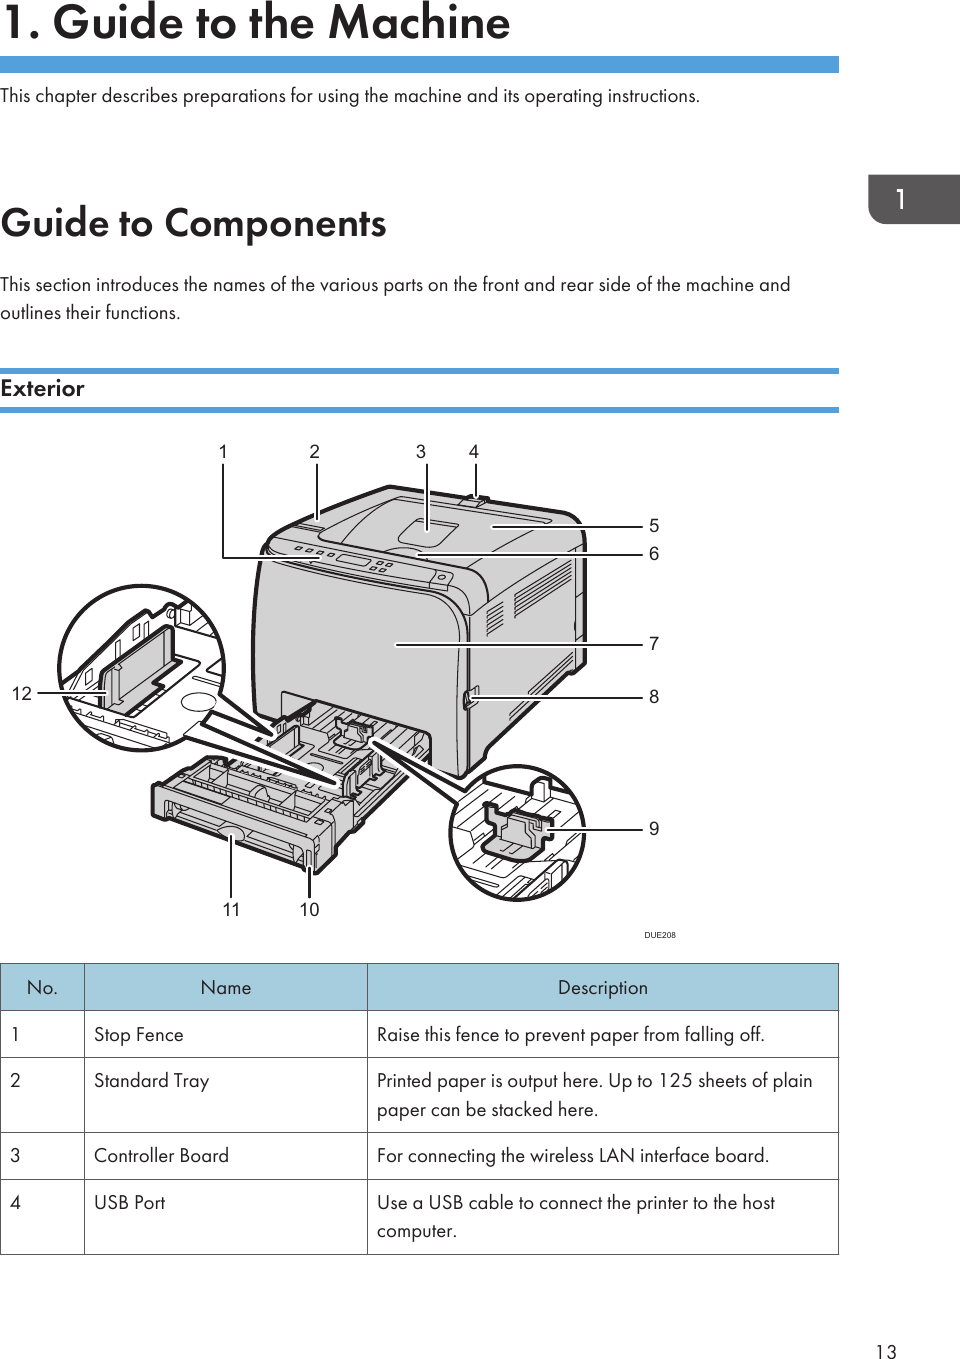 1. Guide to the MachineThis chapter describes preparations for using the machine and its operating instructions.Guide to ComponentsThis section introduces the names of the various parts on the front and rear side of the machine andoutlines their functions.ExteriorDUE2085678911 101212 34No. Name Description1 Stop Fence Raise this fence to prevent paper from falling off.2 Standard Tray Printed paper is output here. Up to 125 sheets of plainpaper can be stacked here.3 Controller Board For connecting the wireless LAN interface board.4 USB Port Use a USB cable to connect the printer to the hostcomputer.13